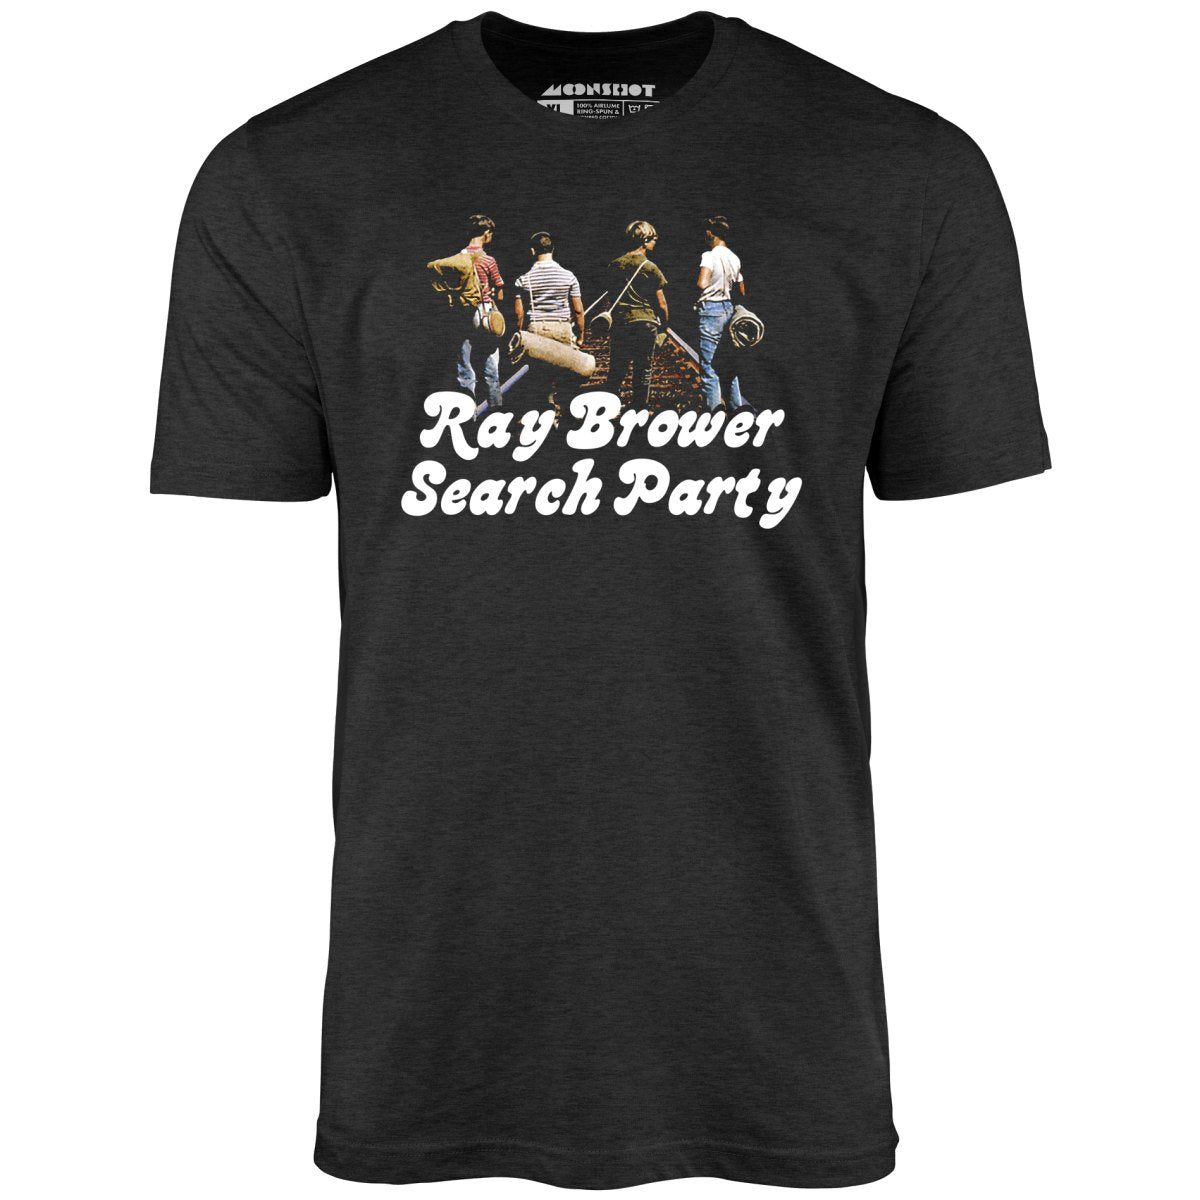 Ray Brower Search Party - Unisex T-Shirt